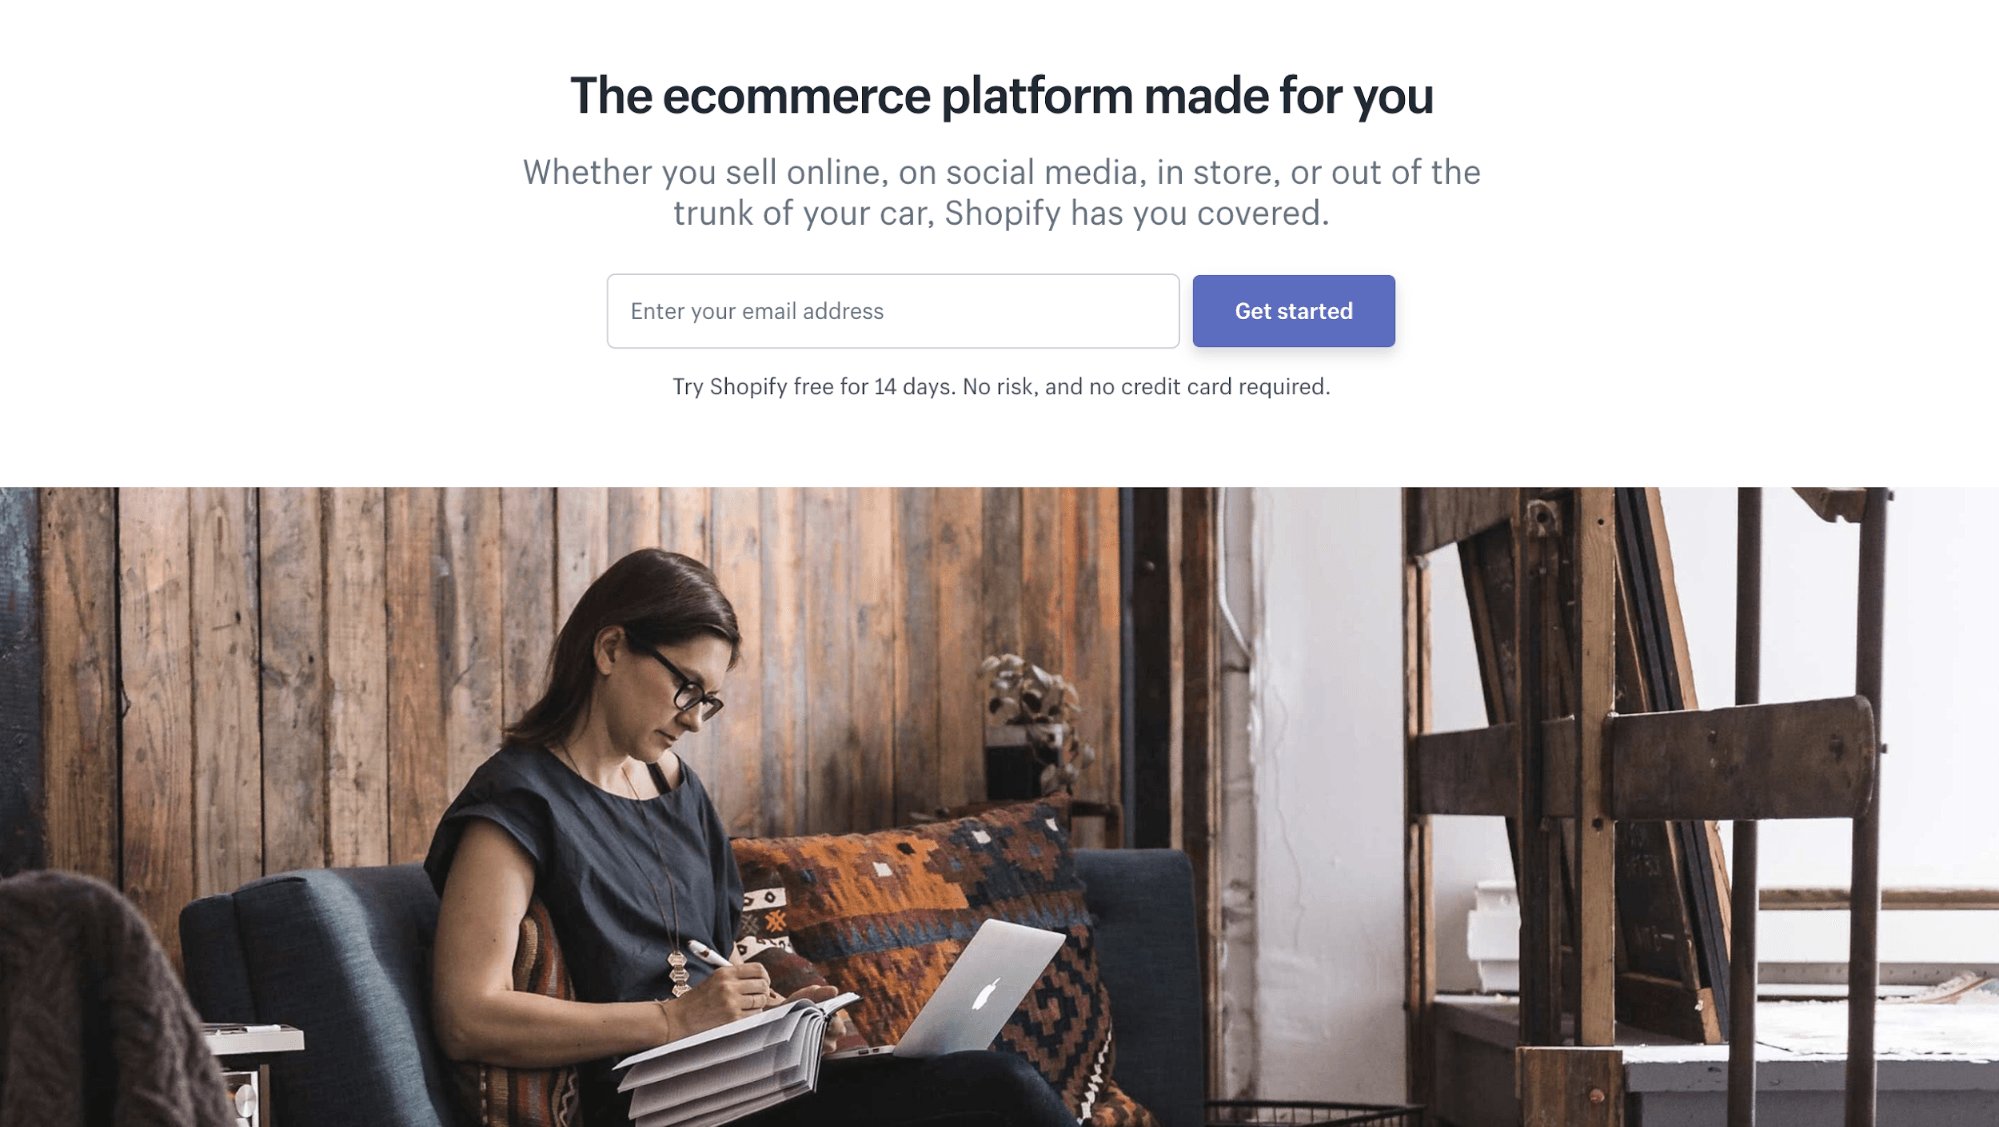 Shopify Vision statement